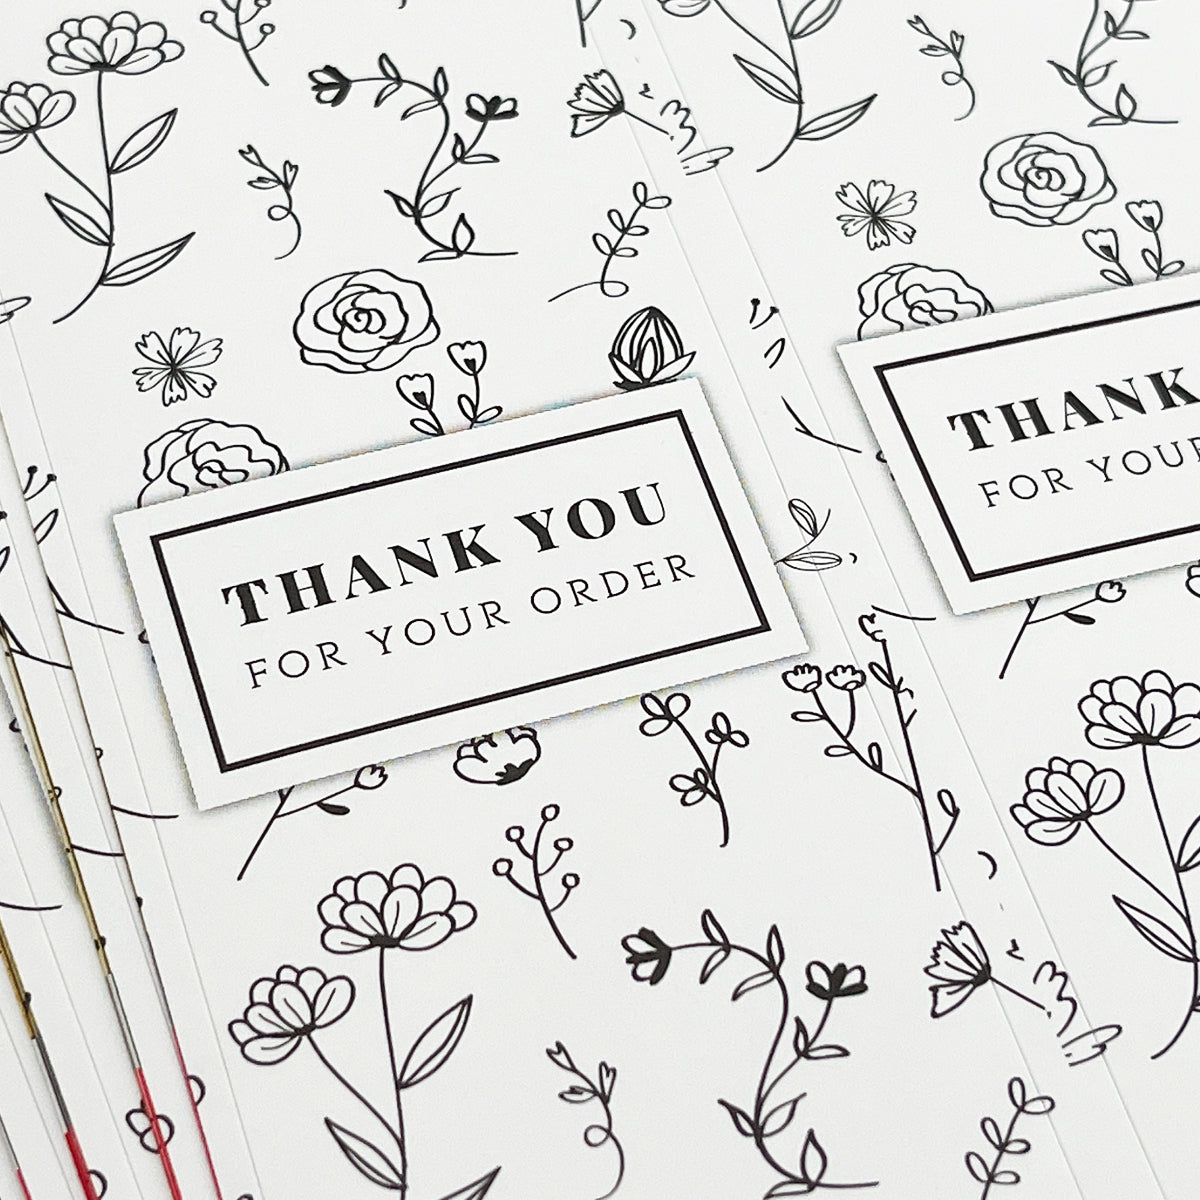 Wrapables 1.56" x 9.88" Rectangular Thank You Sealing Stickers and Labels for Packages, Boxes, Bags, Small Business, Gifts (100pcs), Black & White Floral